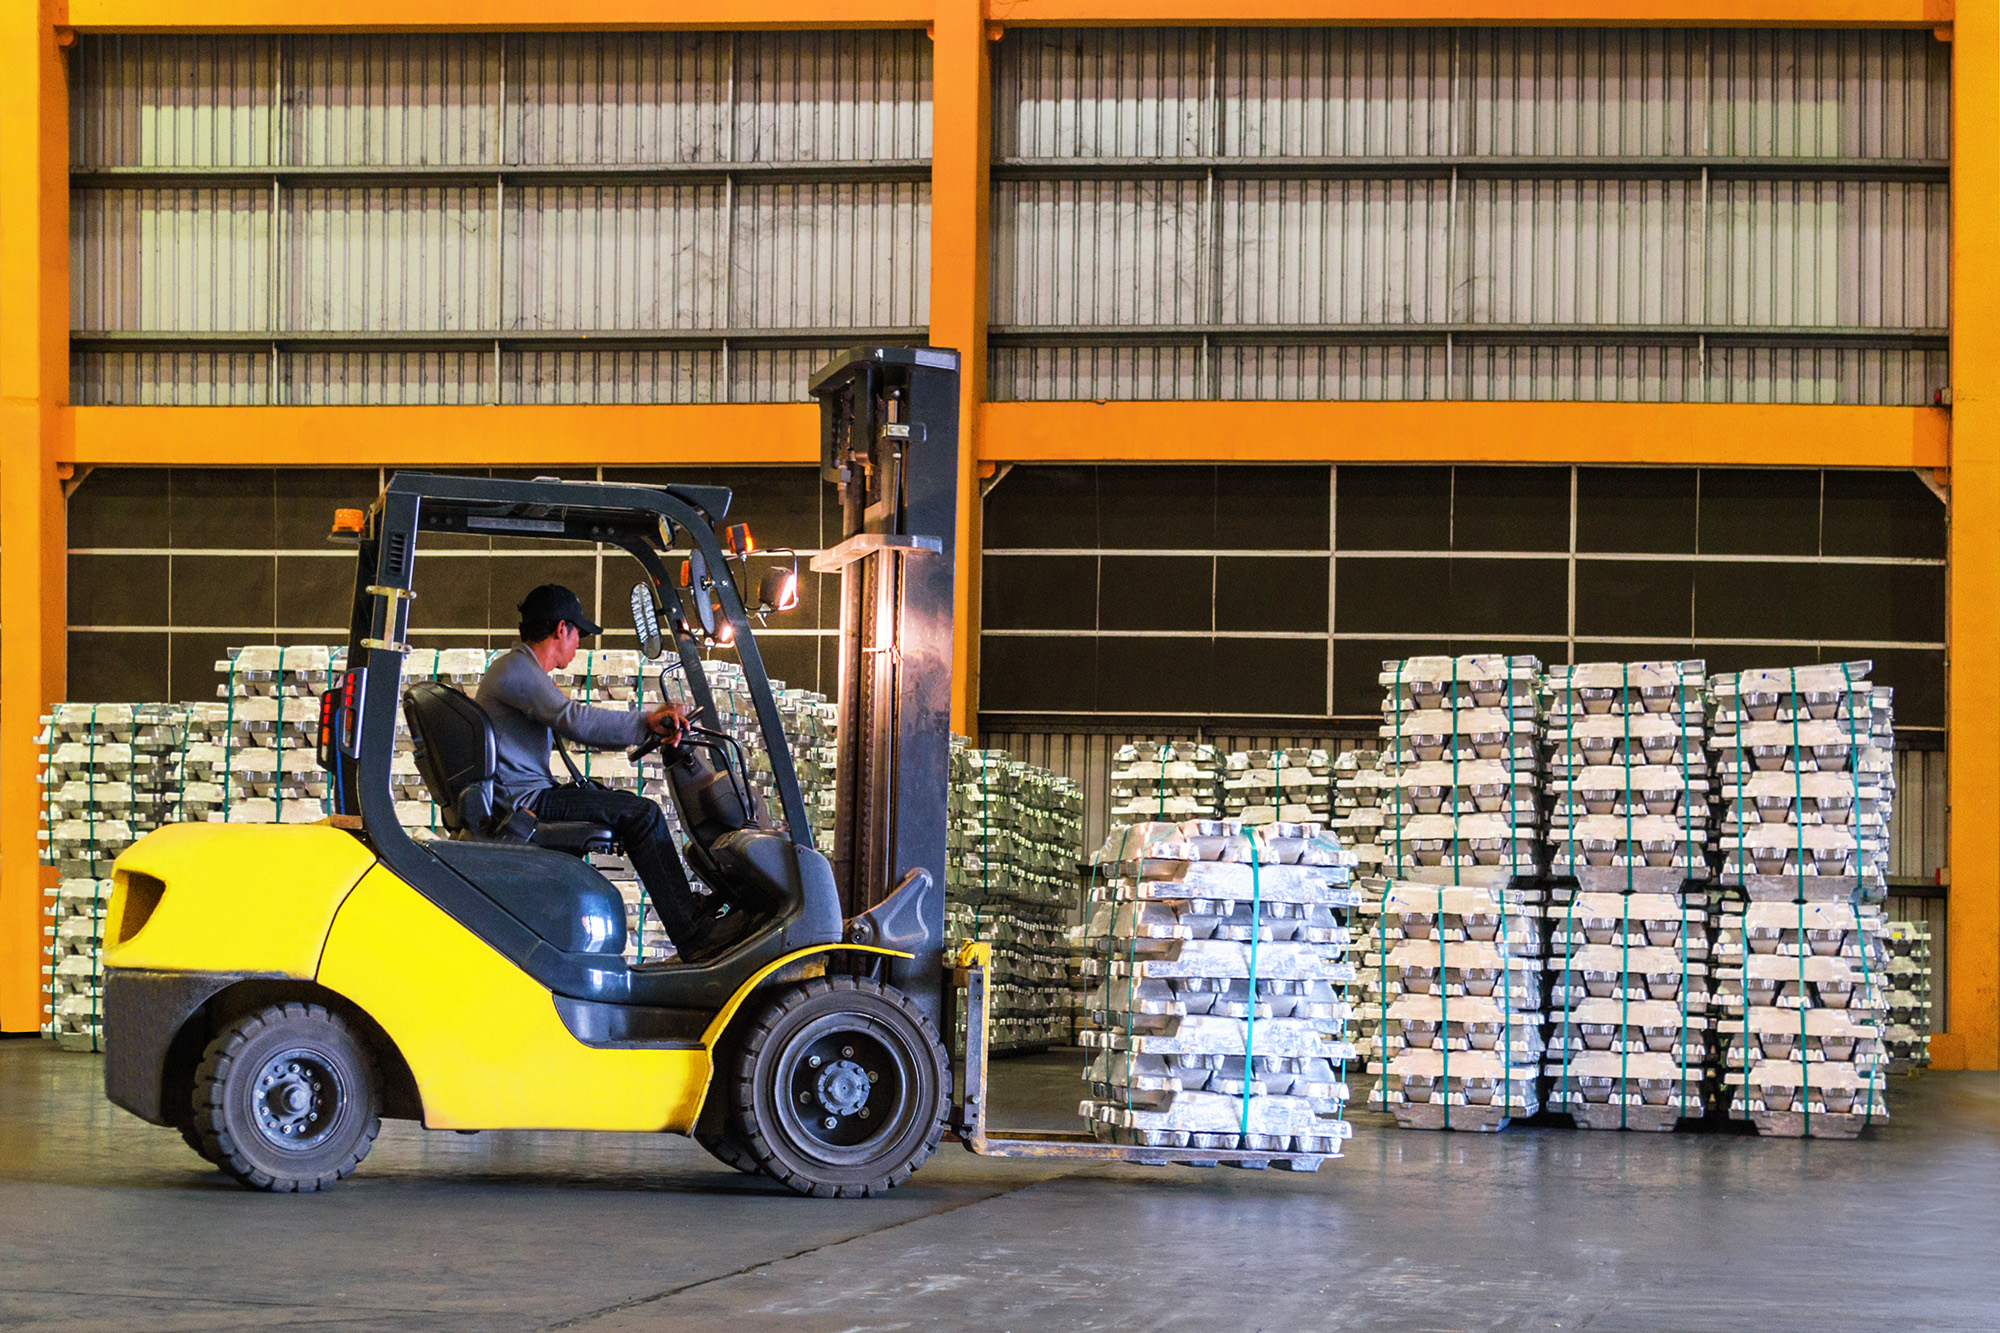 A man lifts a pallet stacked with bags using a forklift.